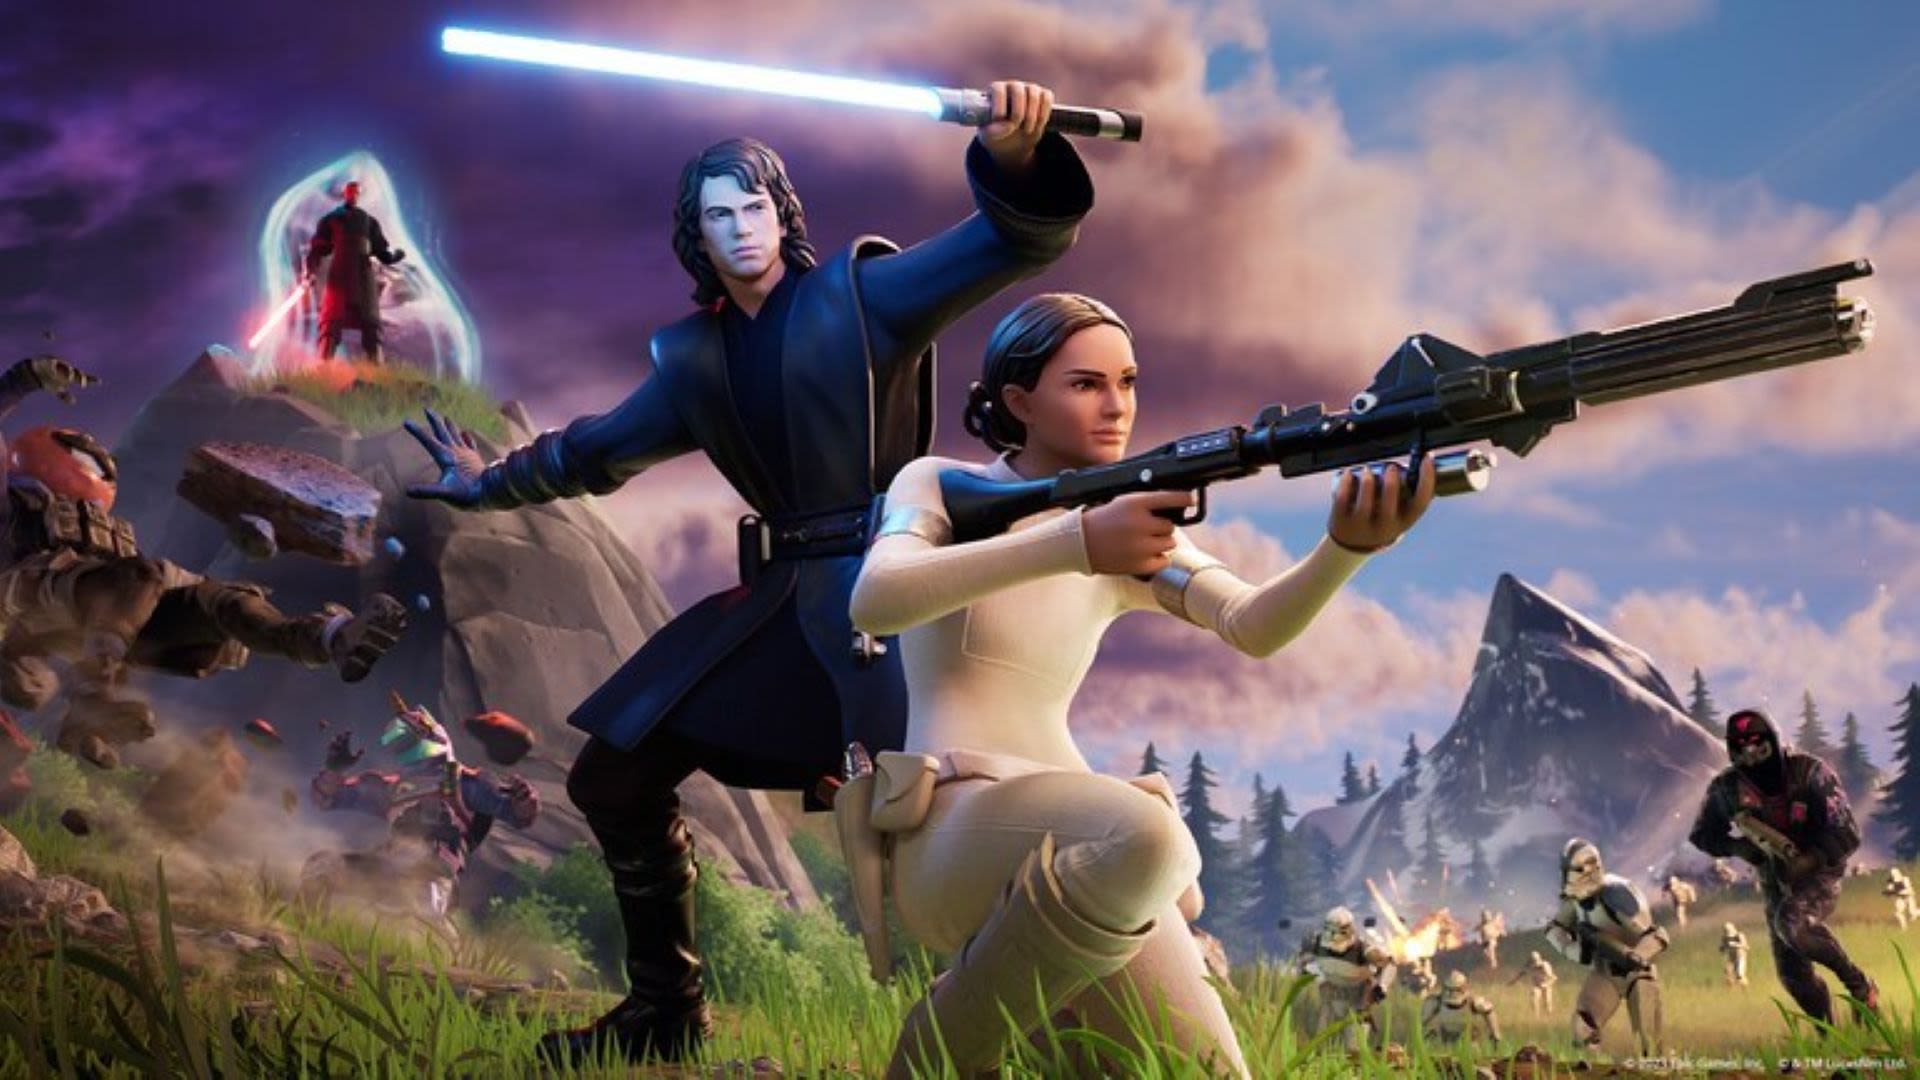 Latest Fortnite update adds Star Wars items and new Marvel skins as last hurrah